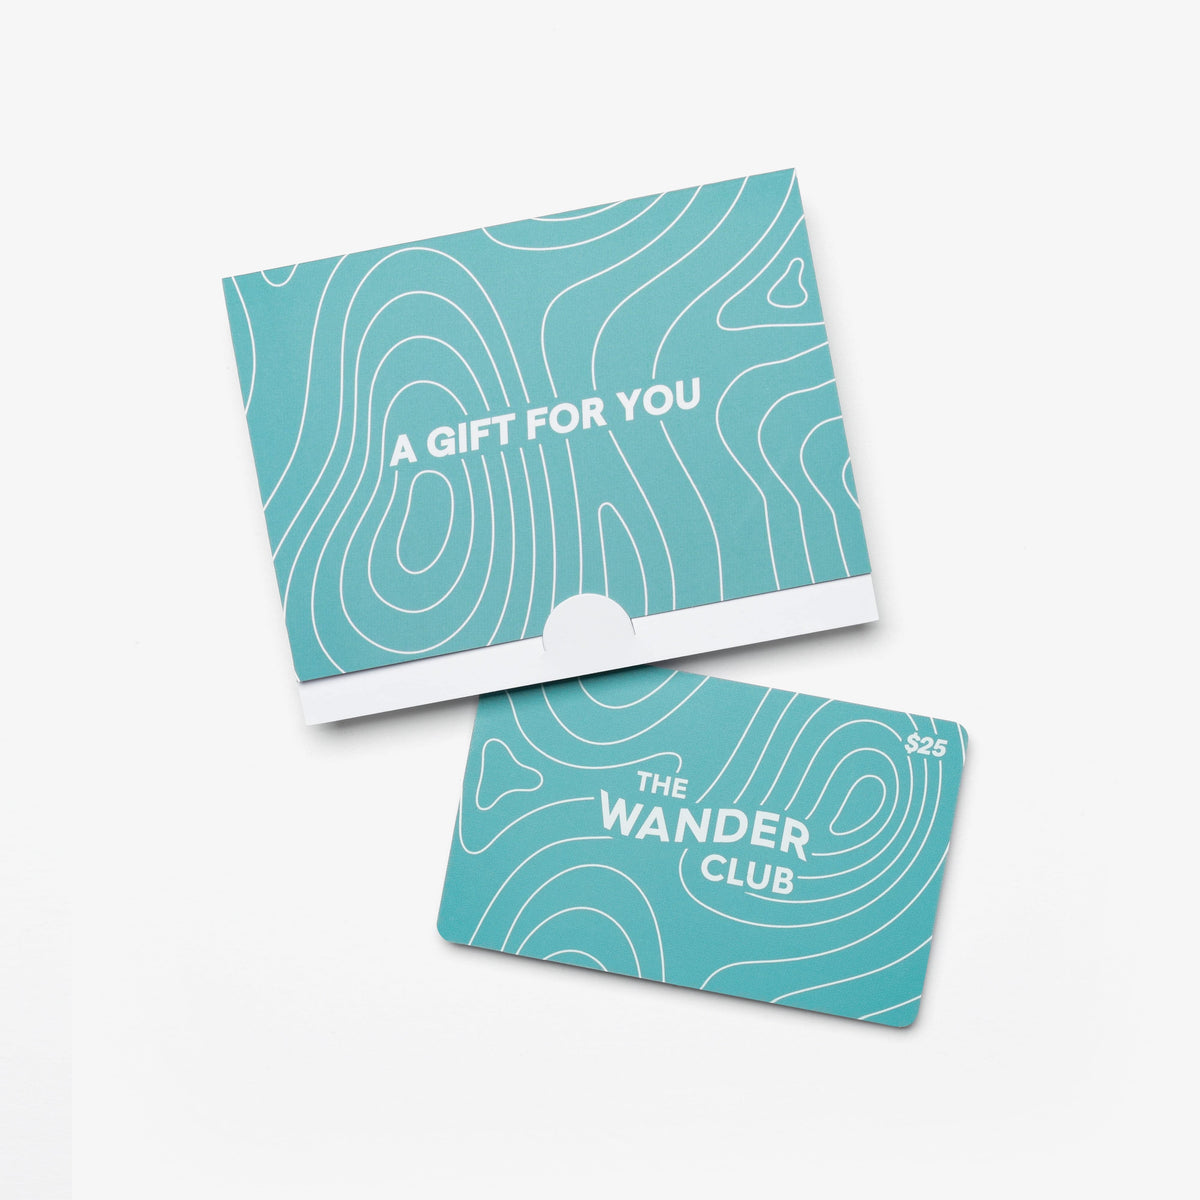 Access Club – Gift Cards